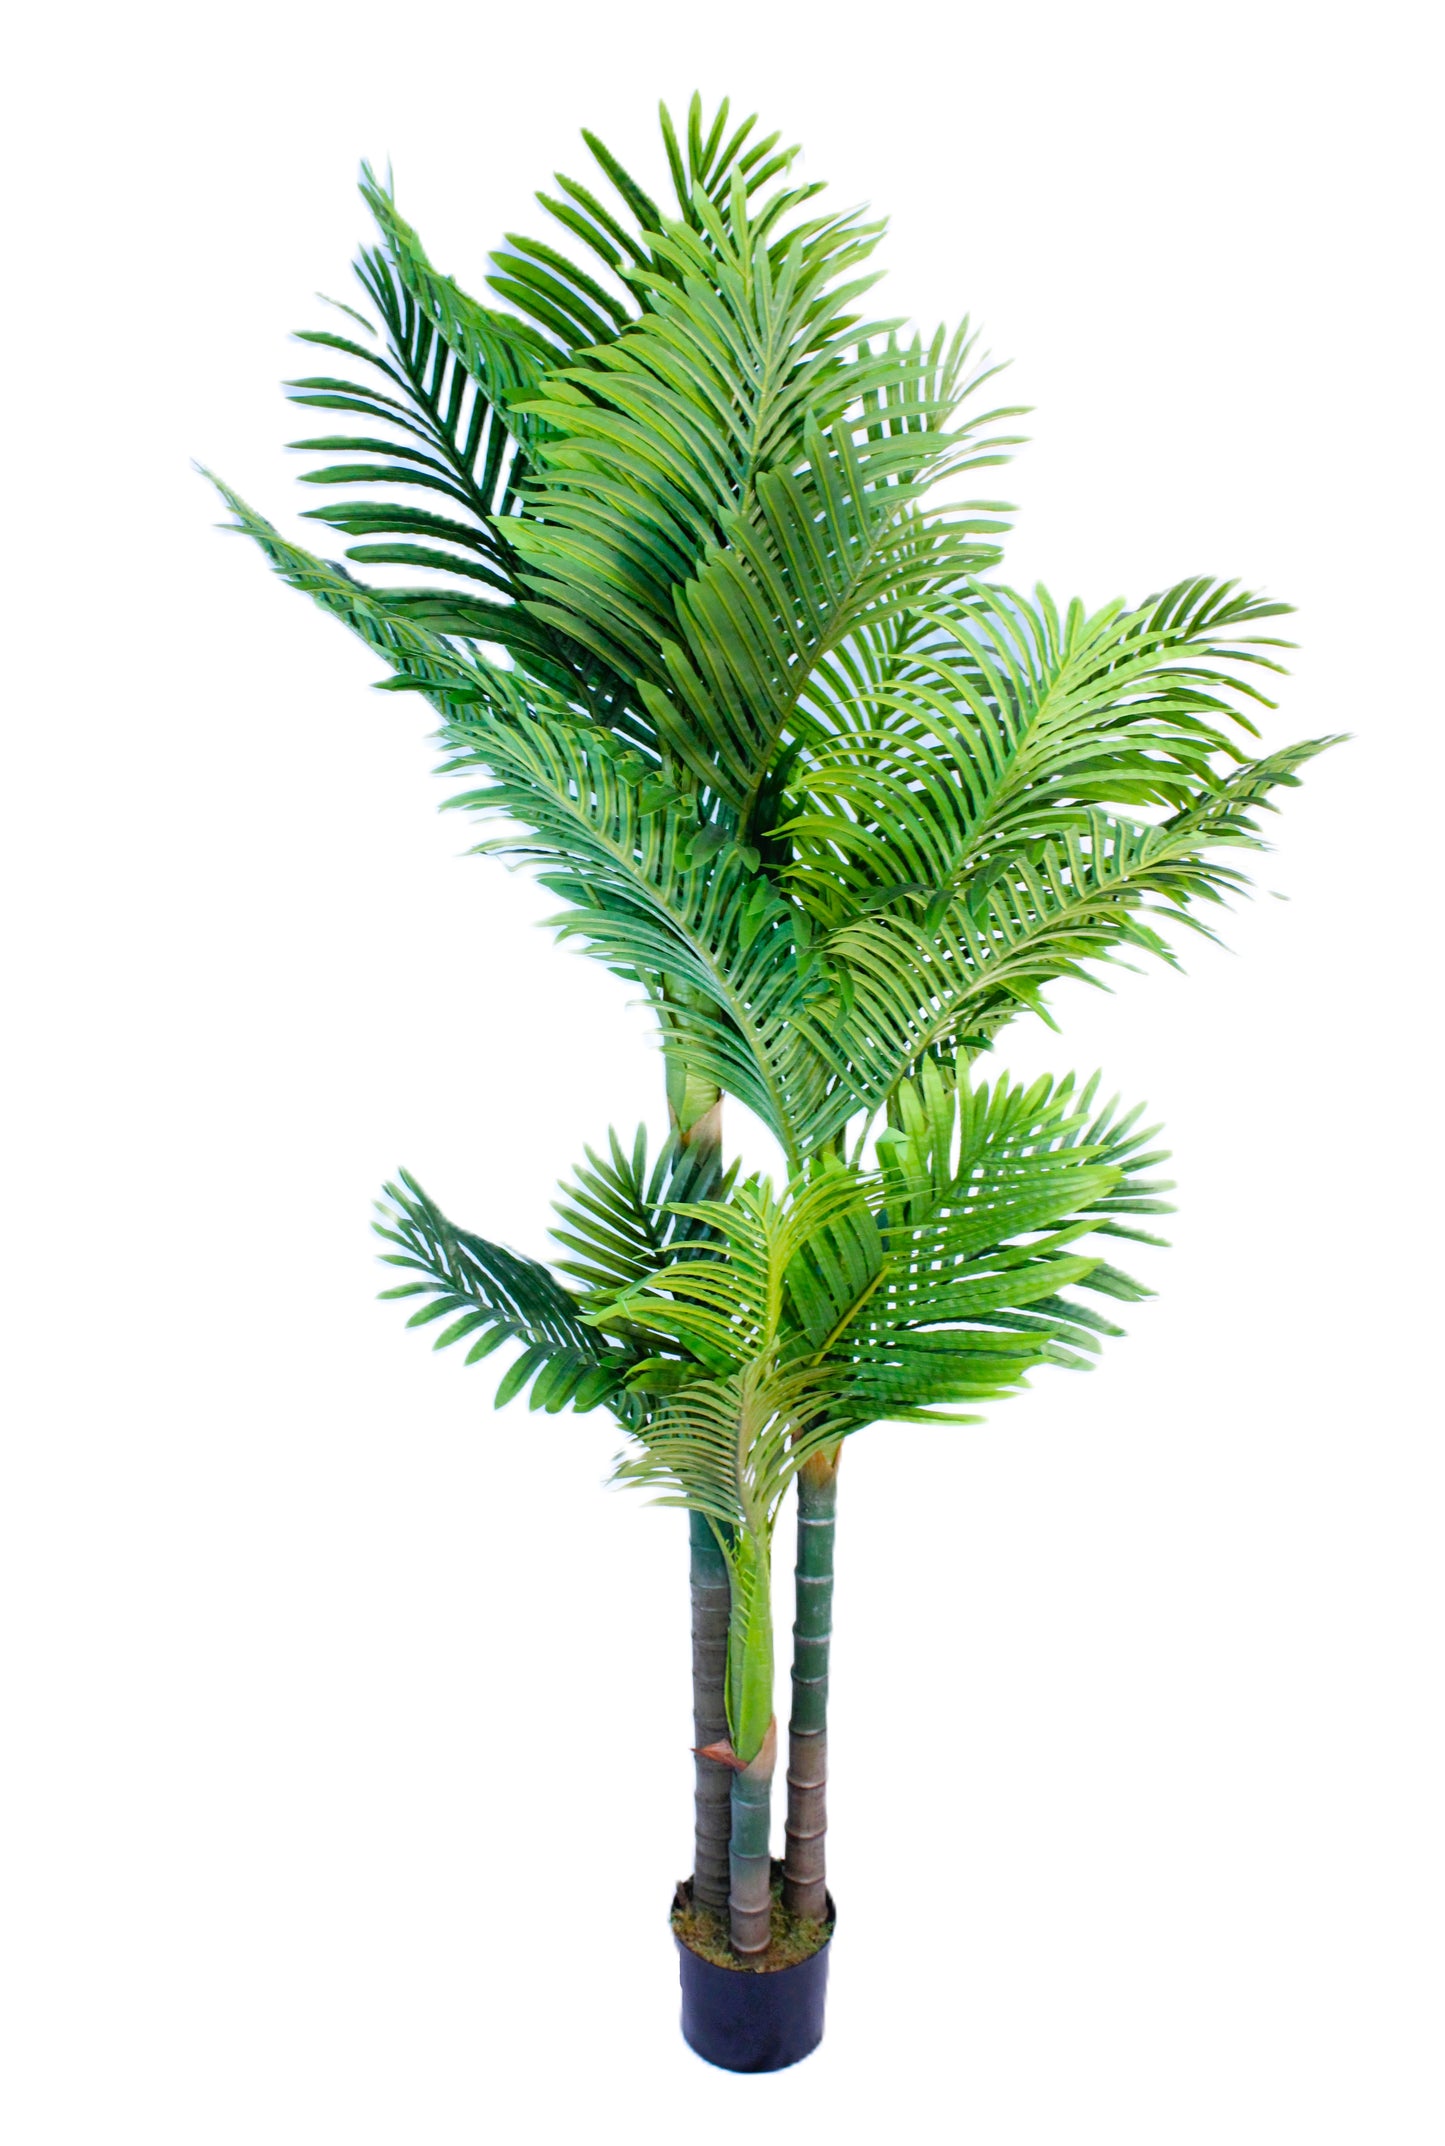 Artificial Golden Cane Palm Tree (6 Feet High) 3 TRUNKS 24 LEAVES